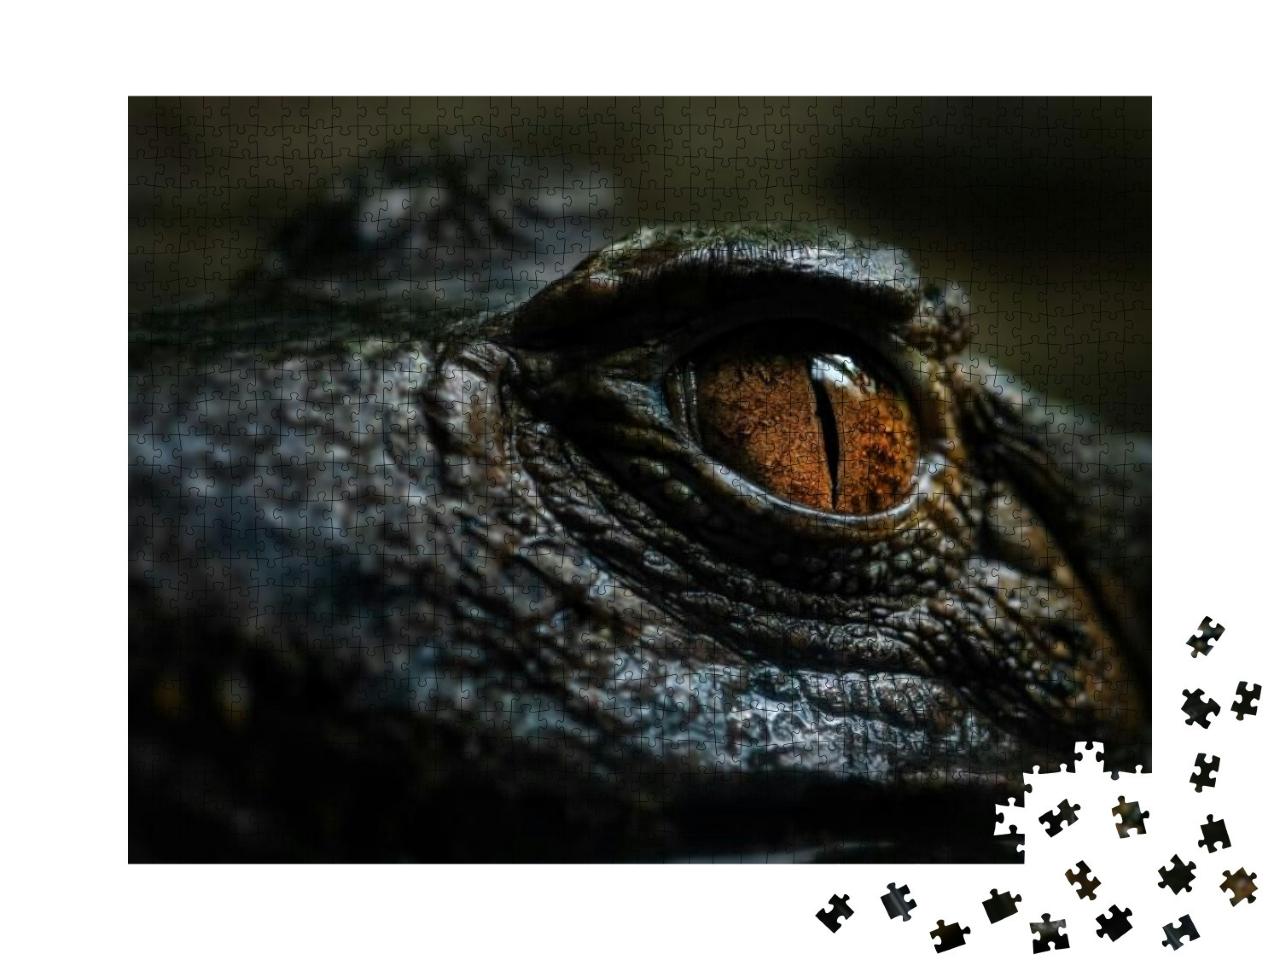 Cuviers Smooth-Fronted Caiman - Paleosuchus Palpebrosus... Jigsaw Puzzle with 1000 pieces